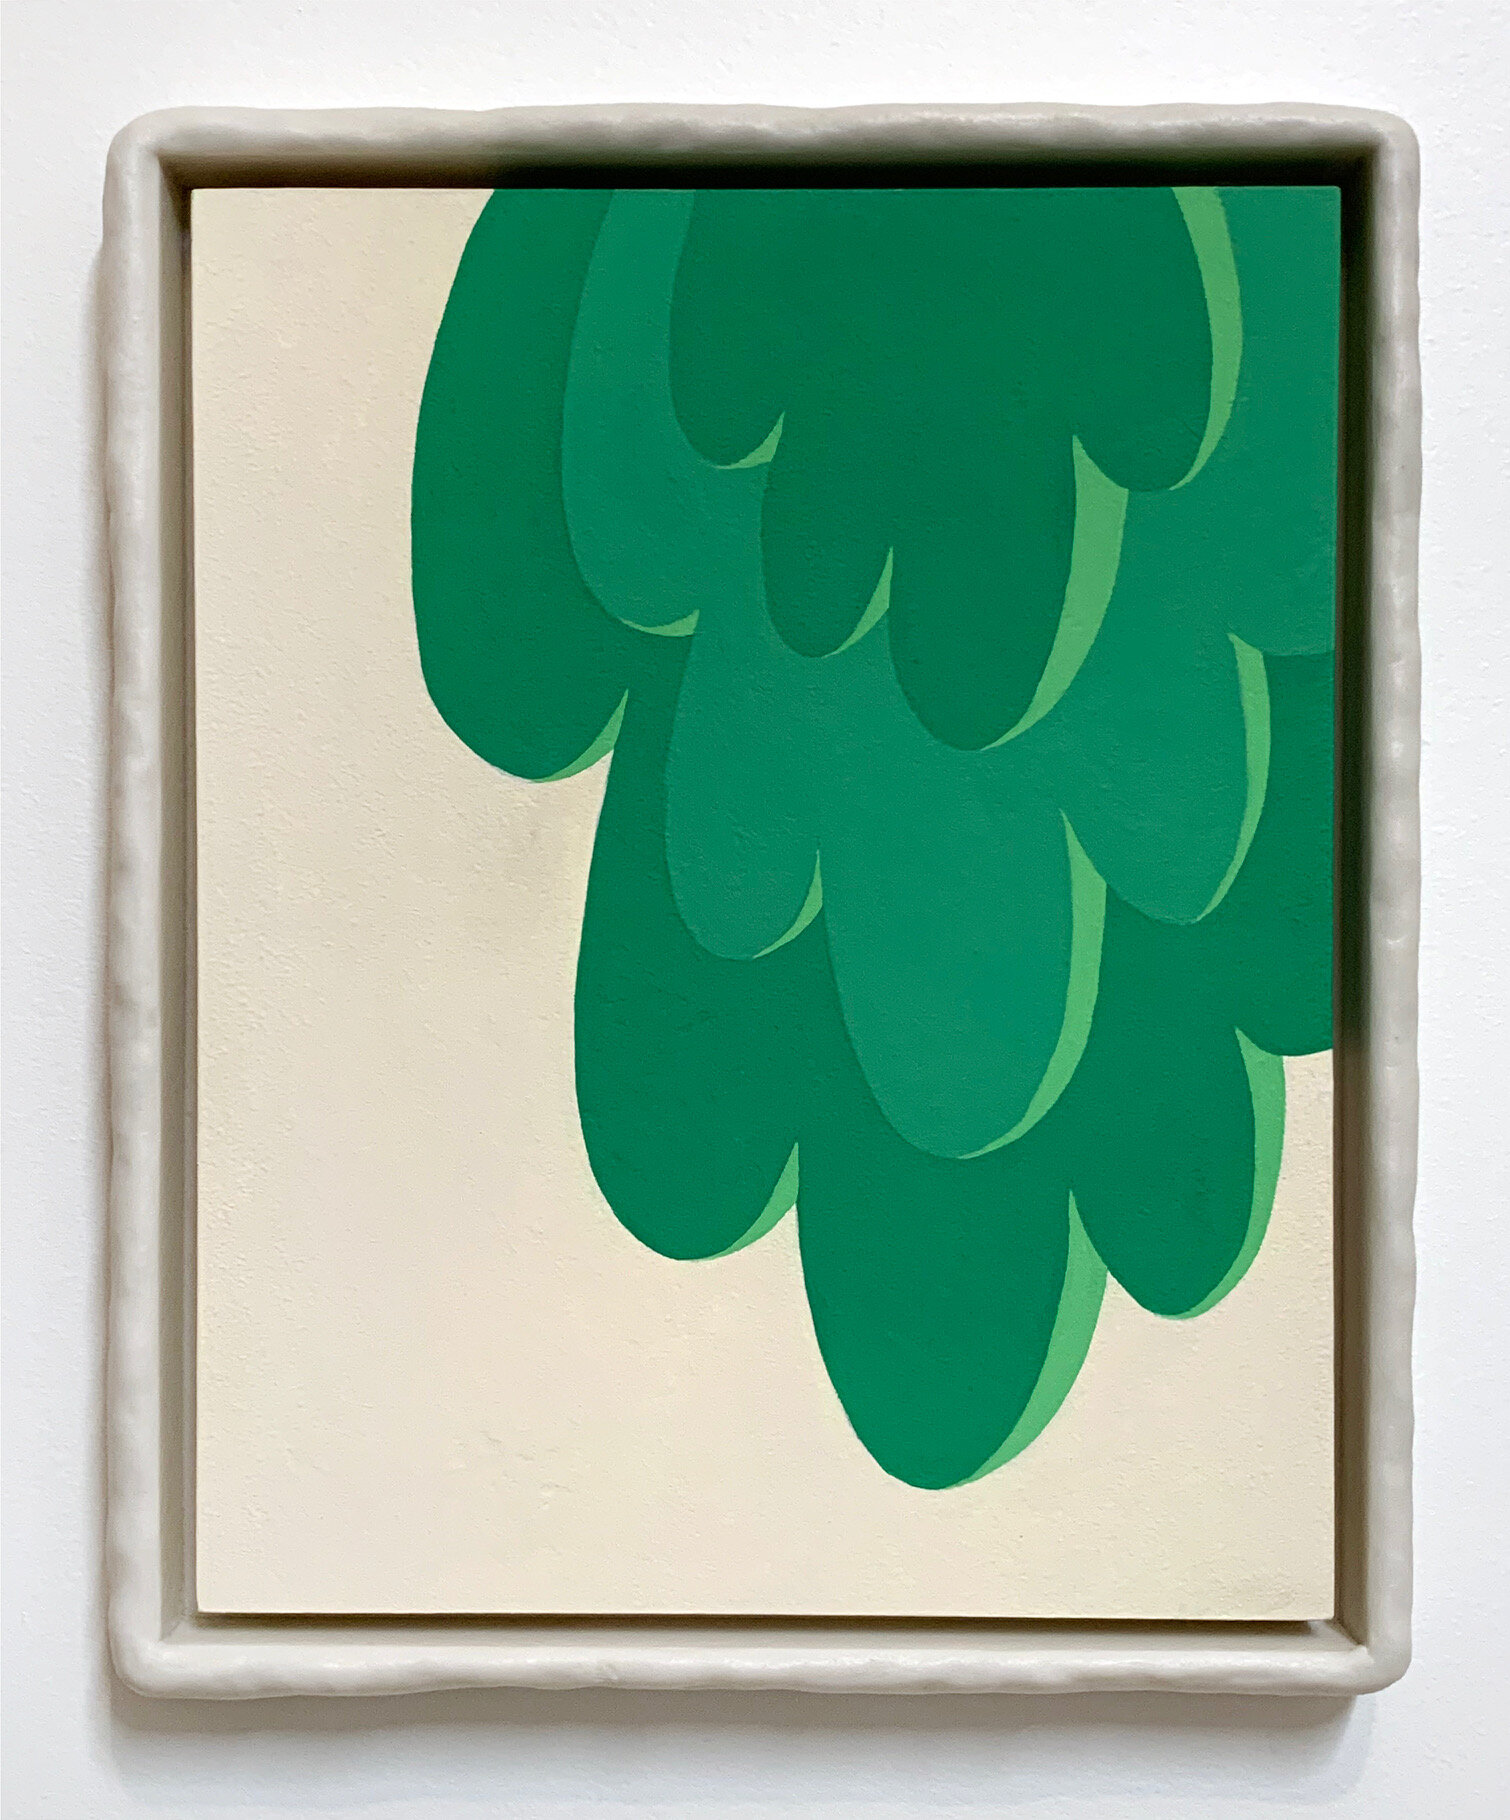   Droopy Pulp , 2019  15 x 12 x 2 inches  Flashe on wood panel in marble composite frame 